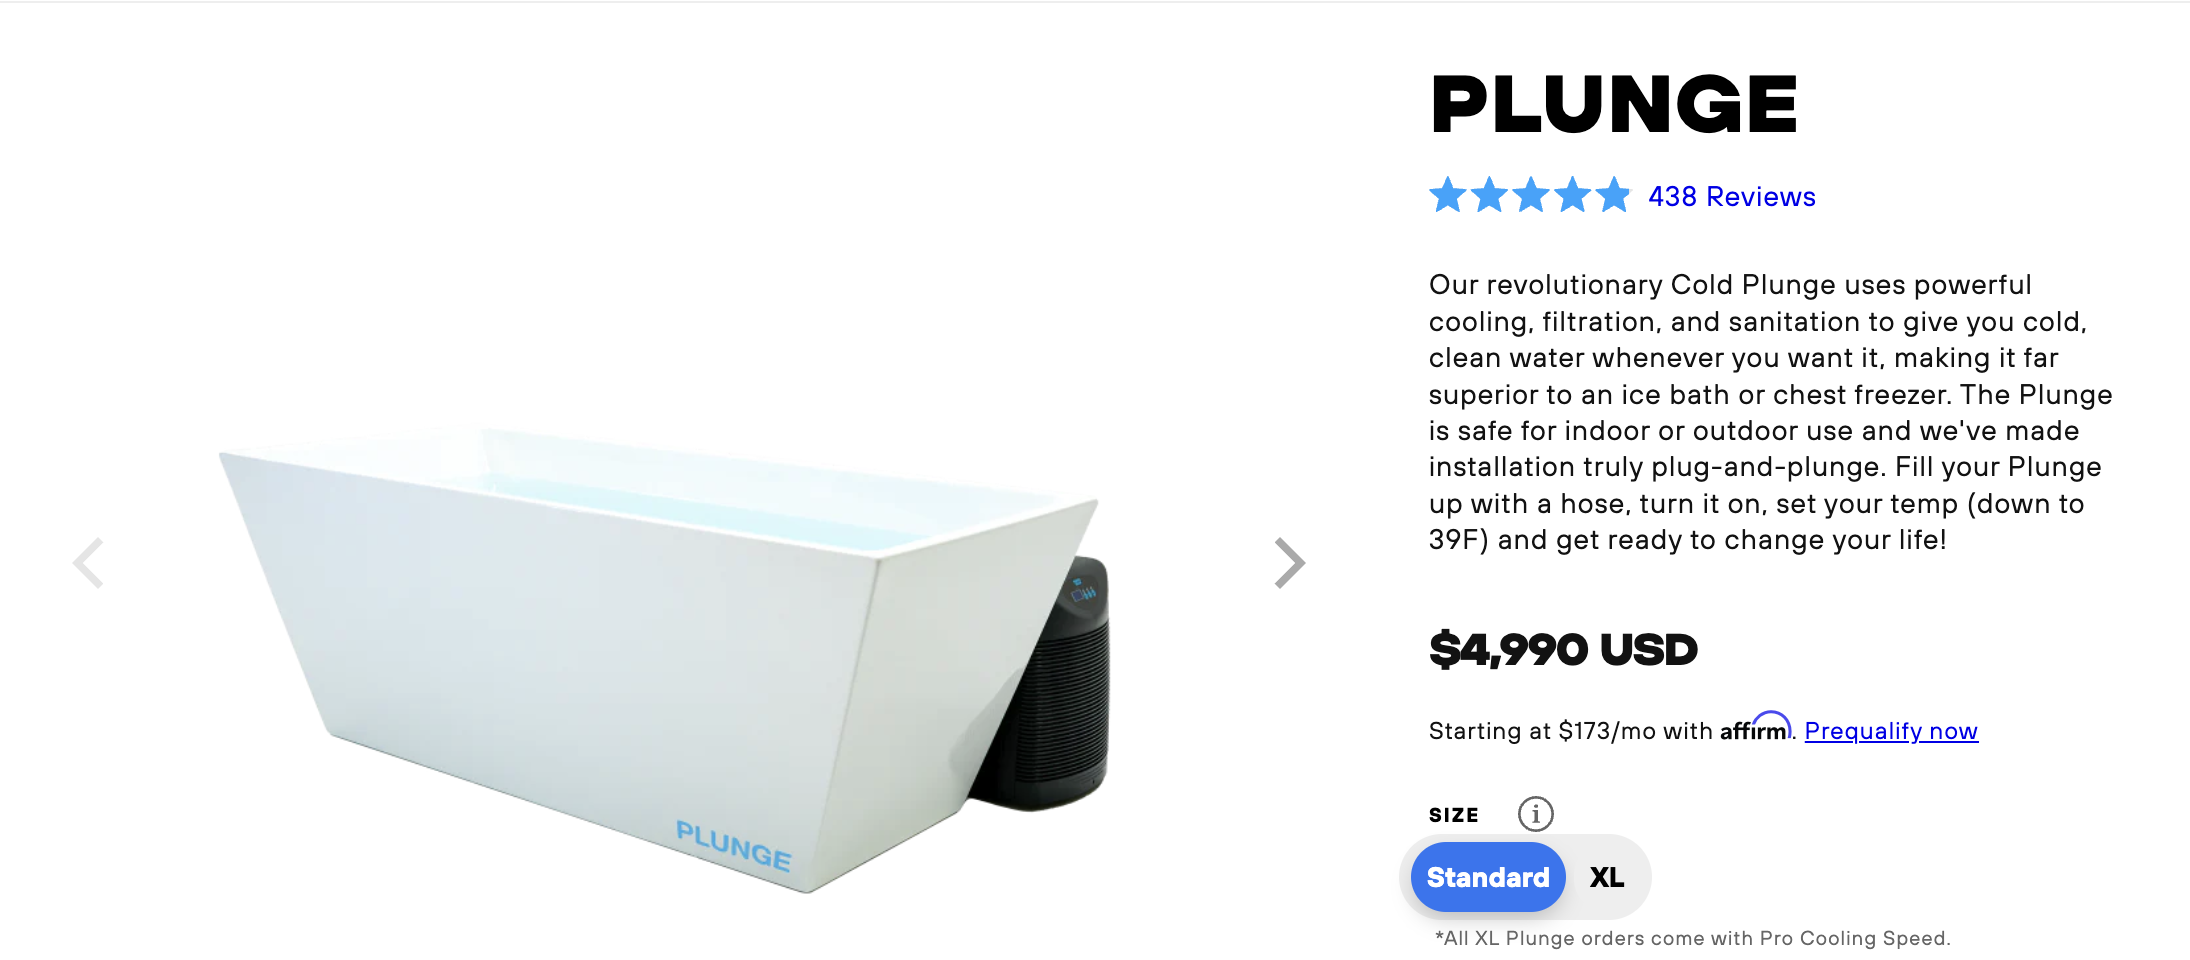 Screencap of the plunge tub selling for $4,990